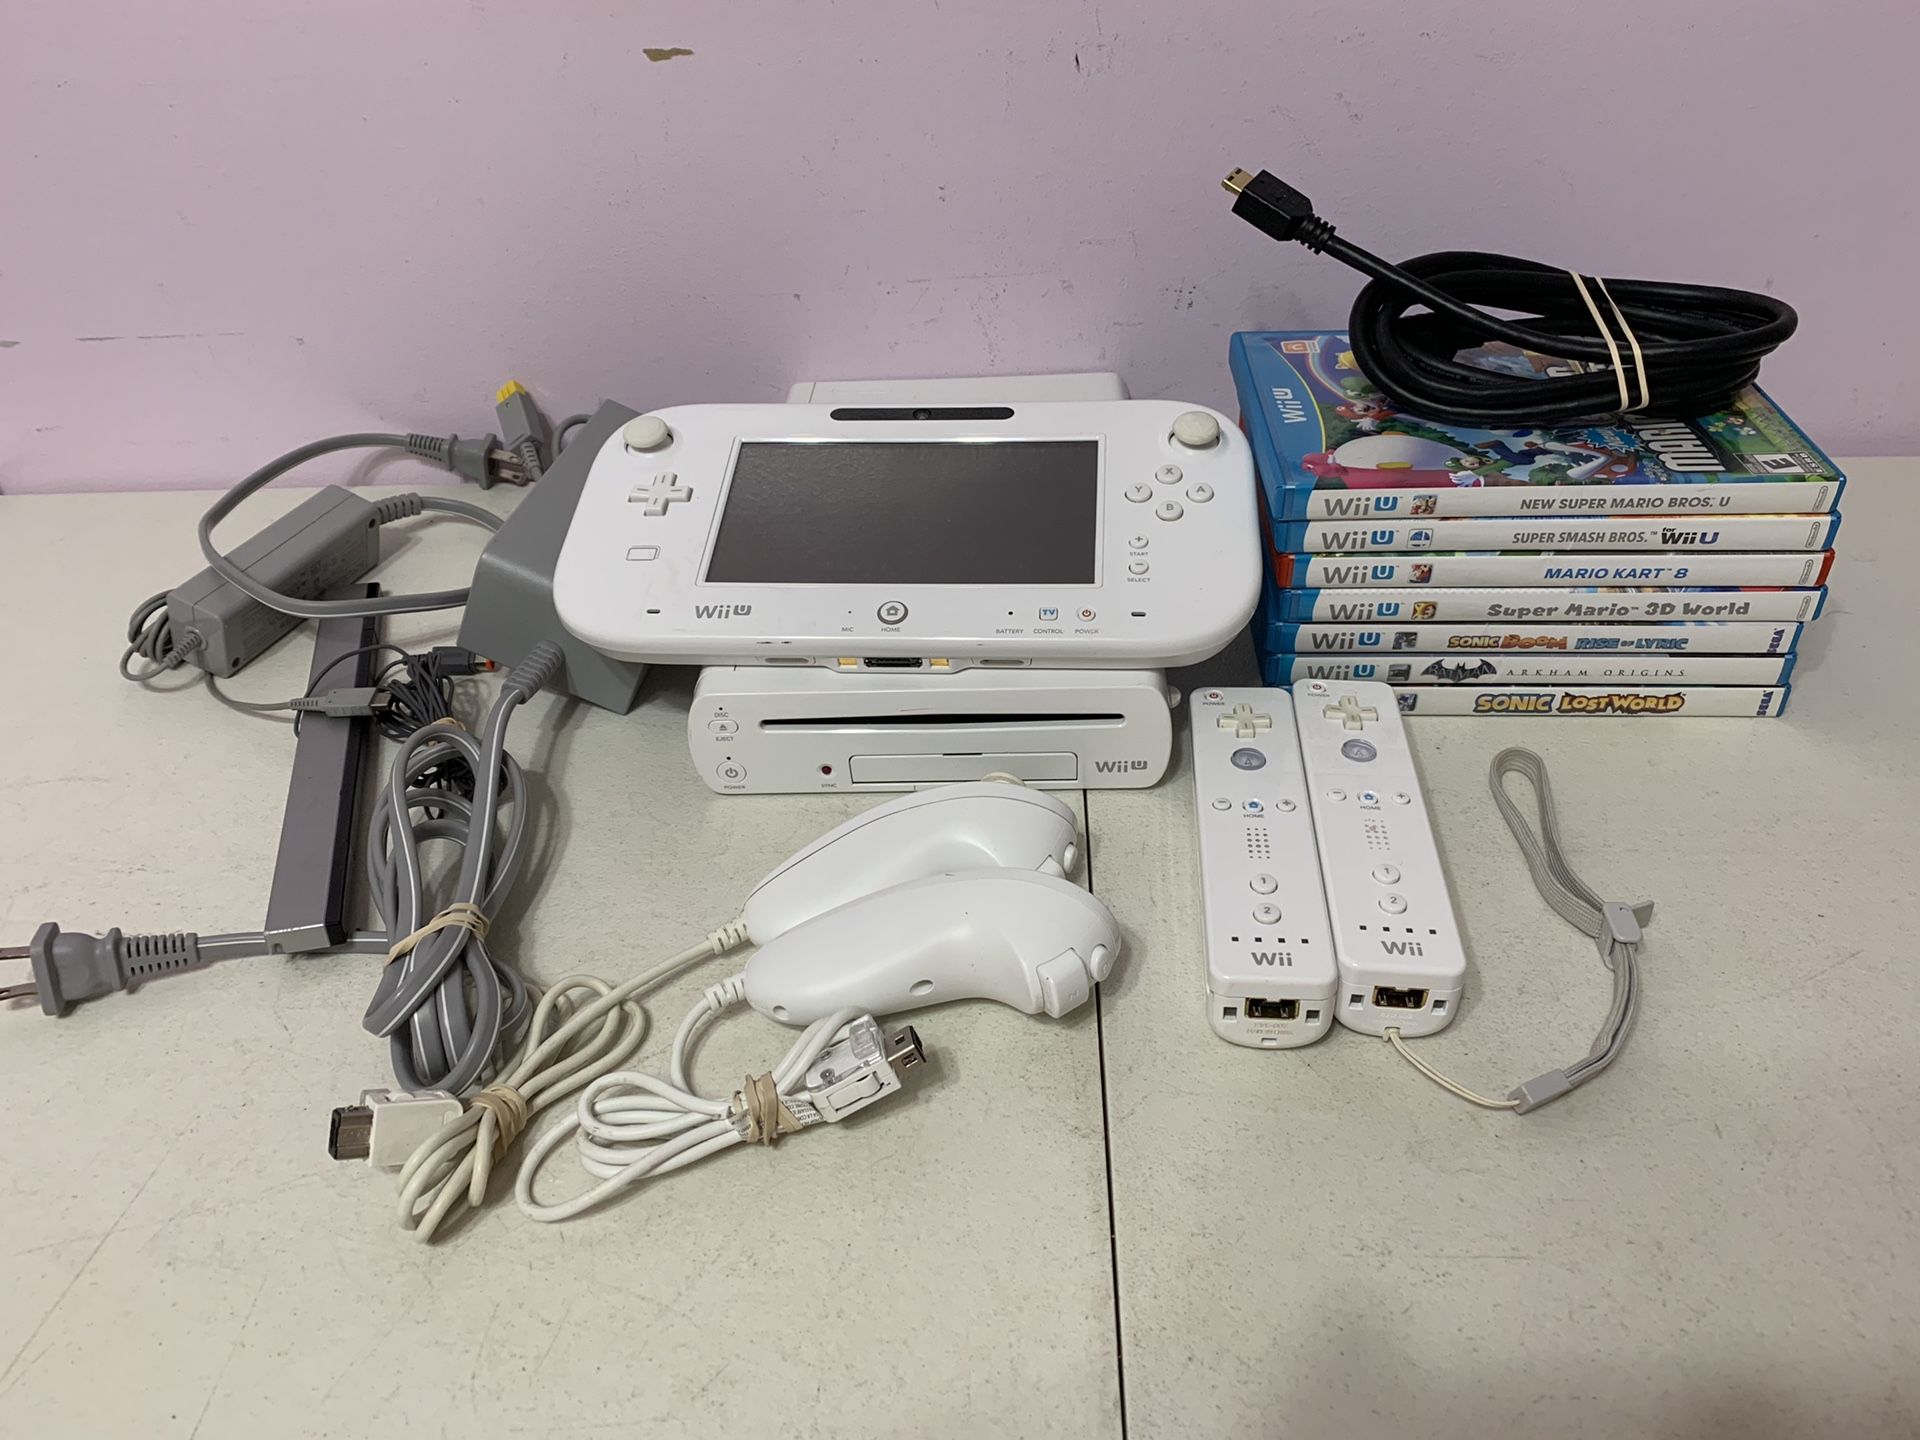 Nintendo Wii U system with 7 games